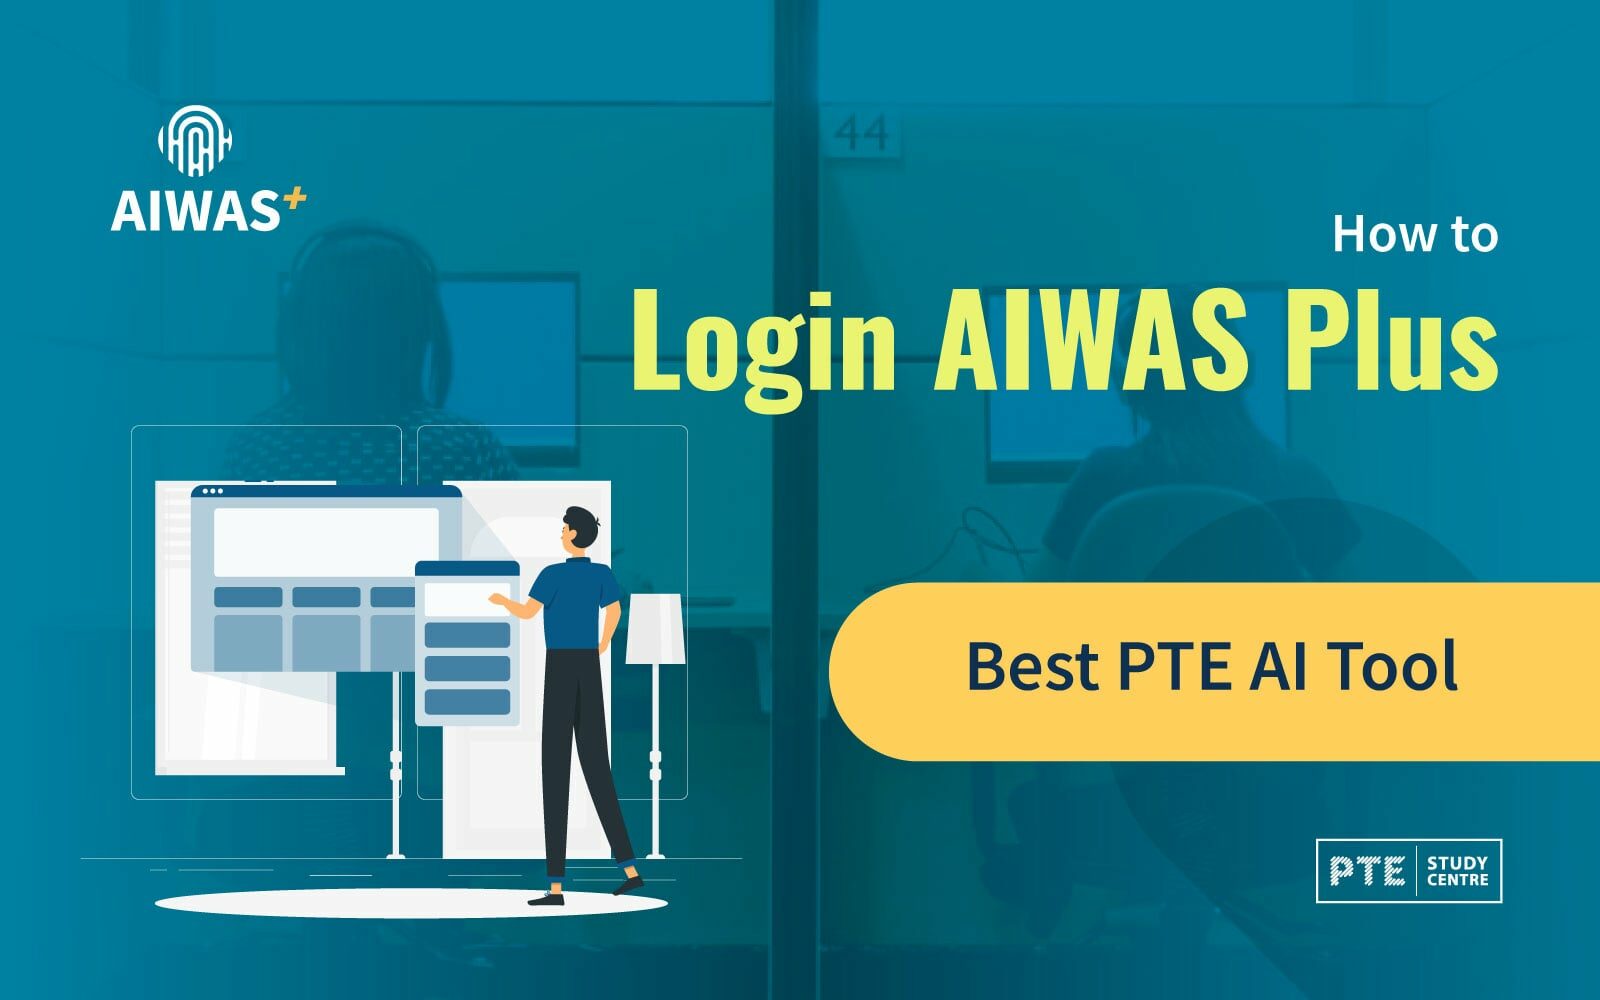 How to Login AIWAS Plus?